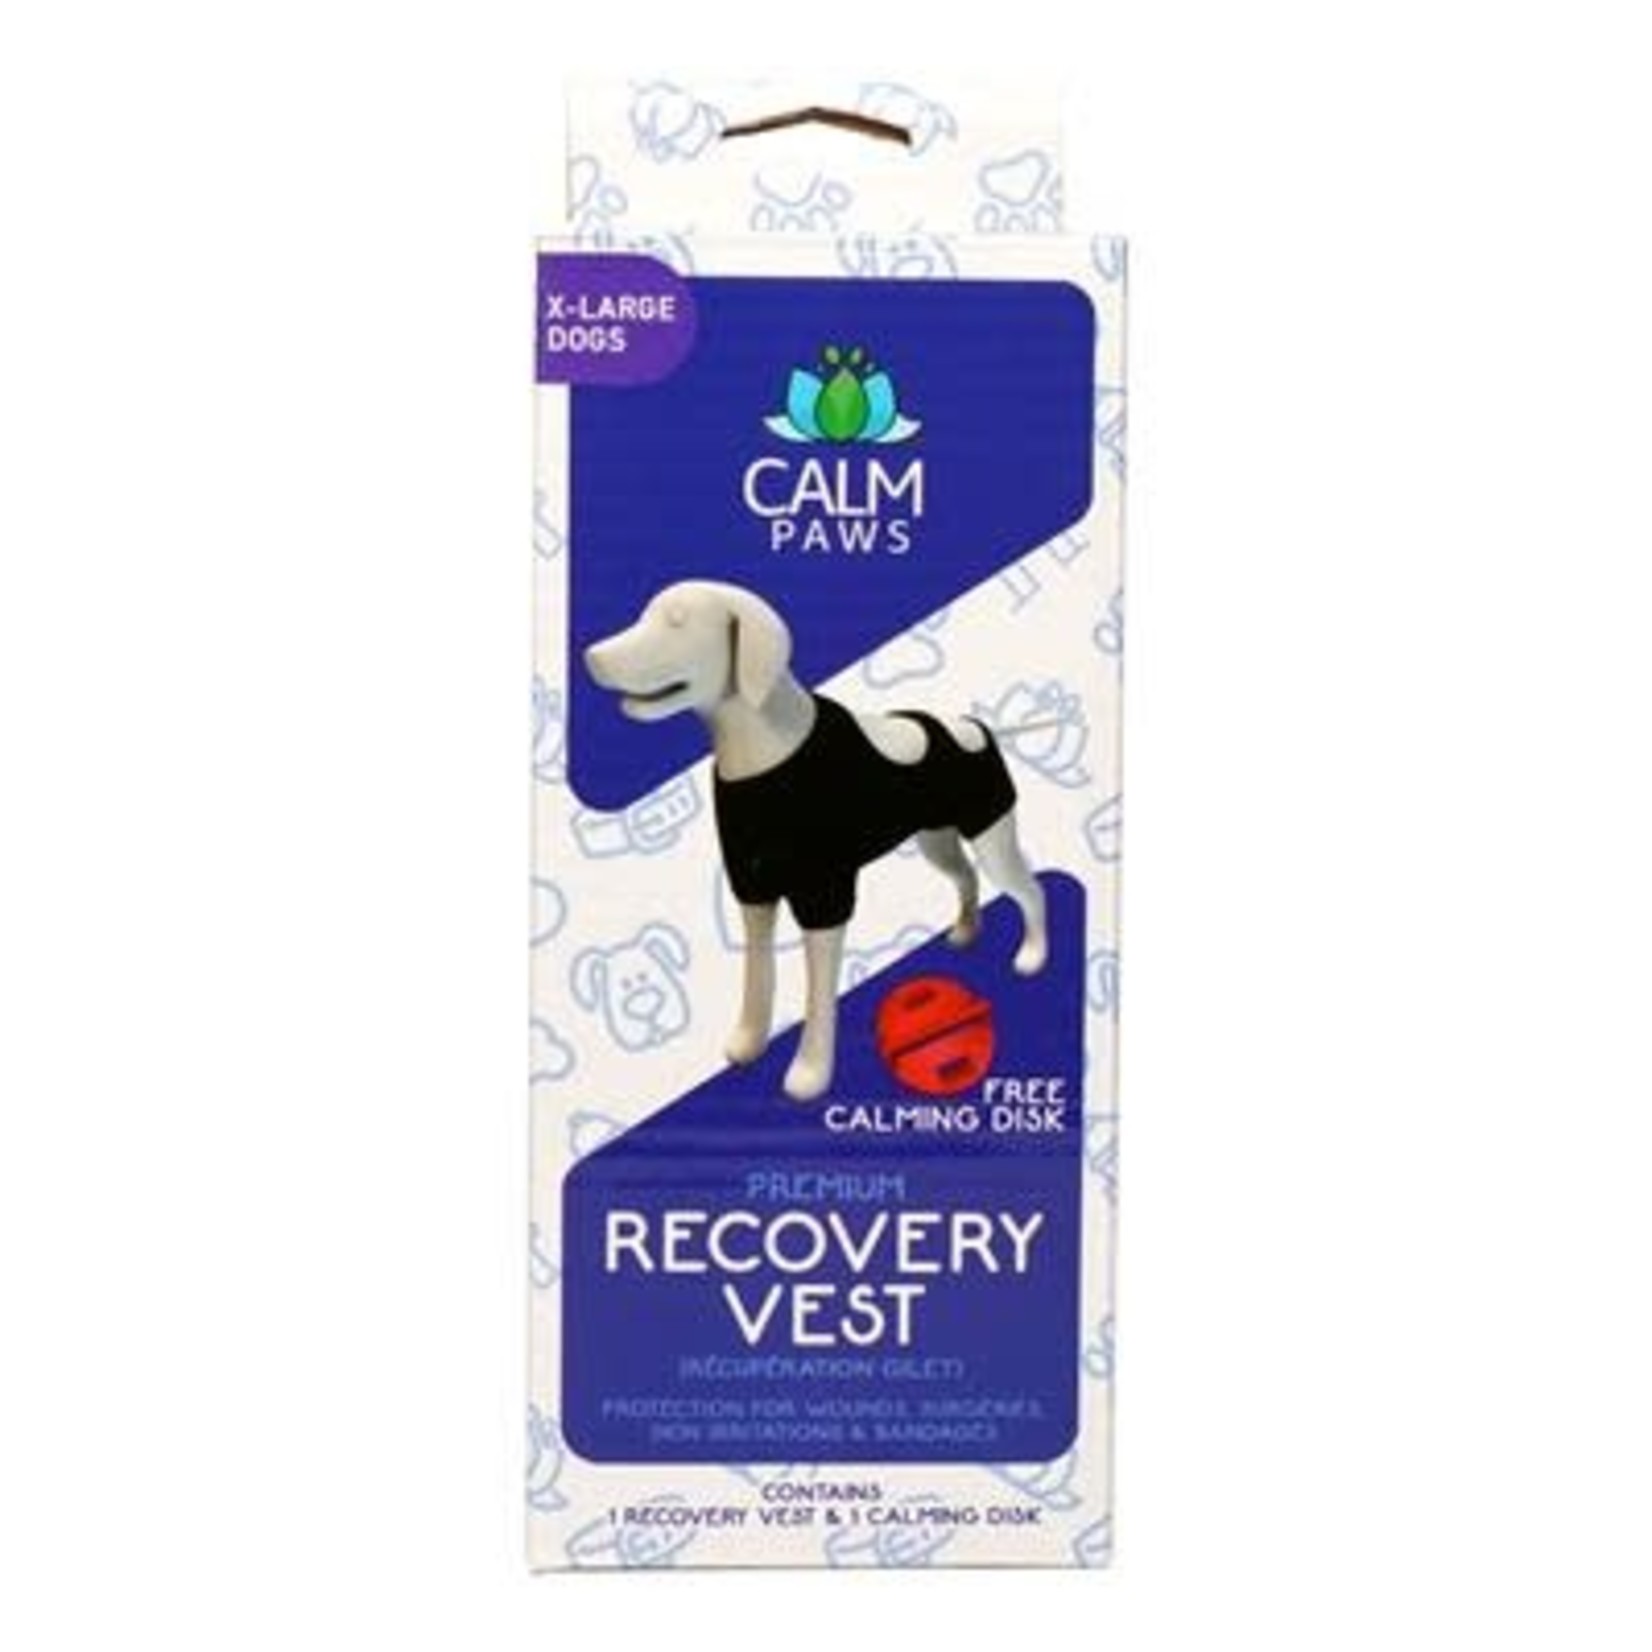 Calm Paws Calm Paws Recovery Vest- X-Large